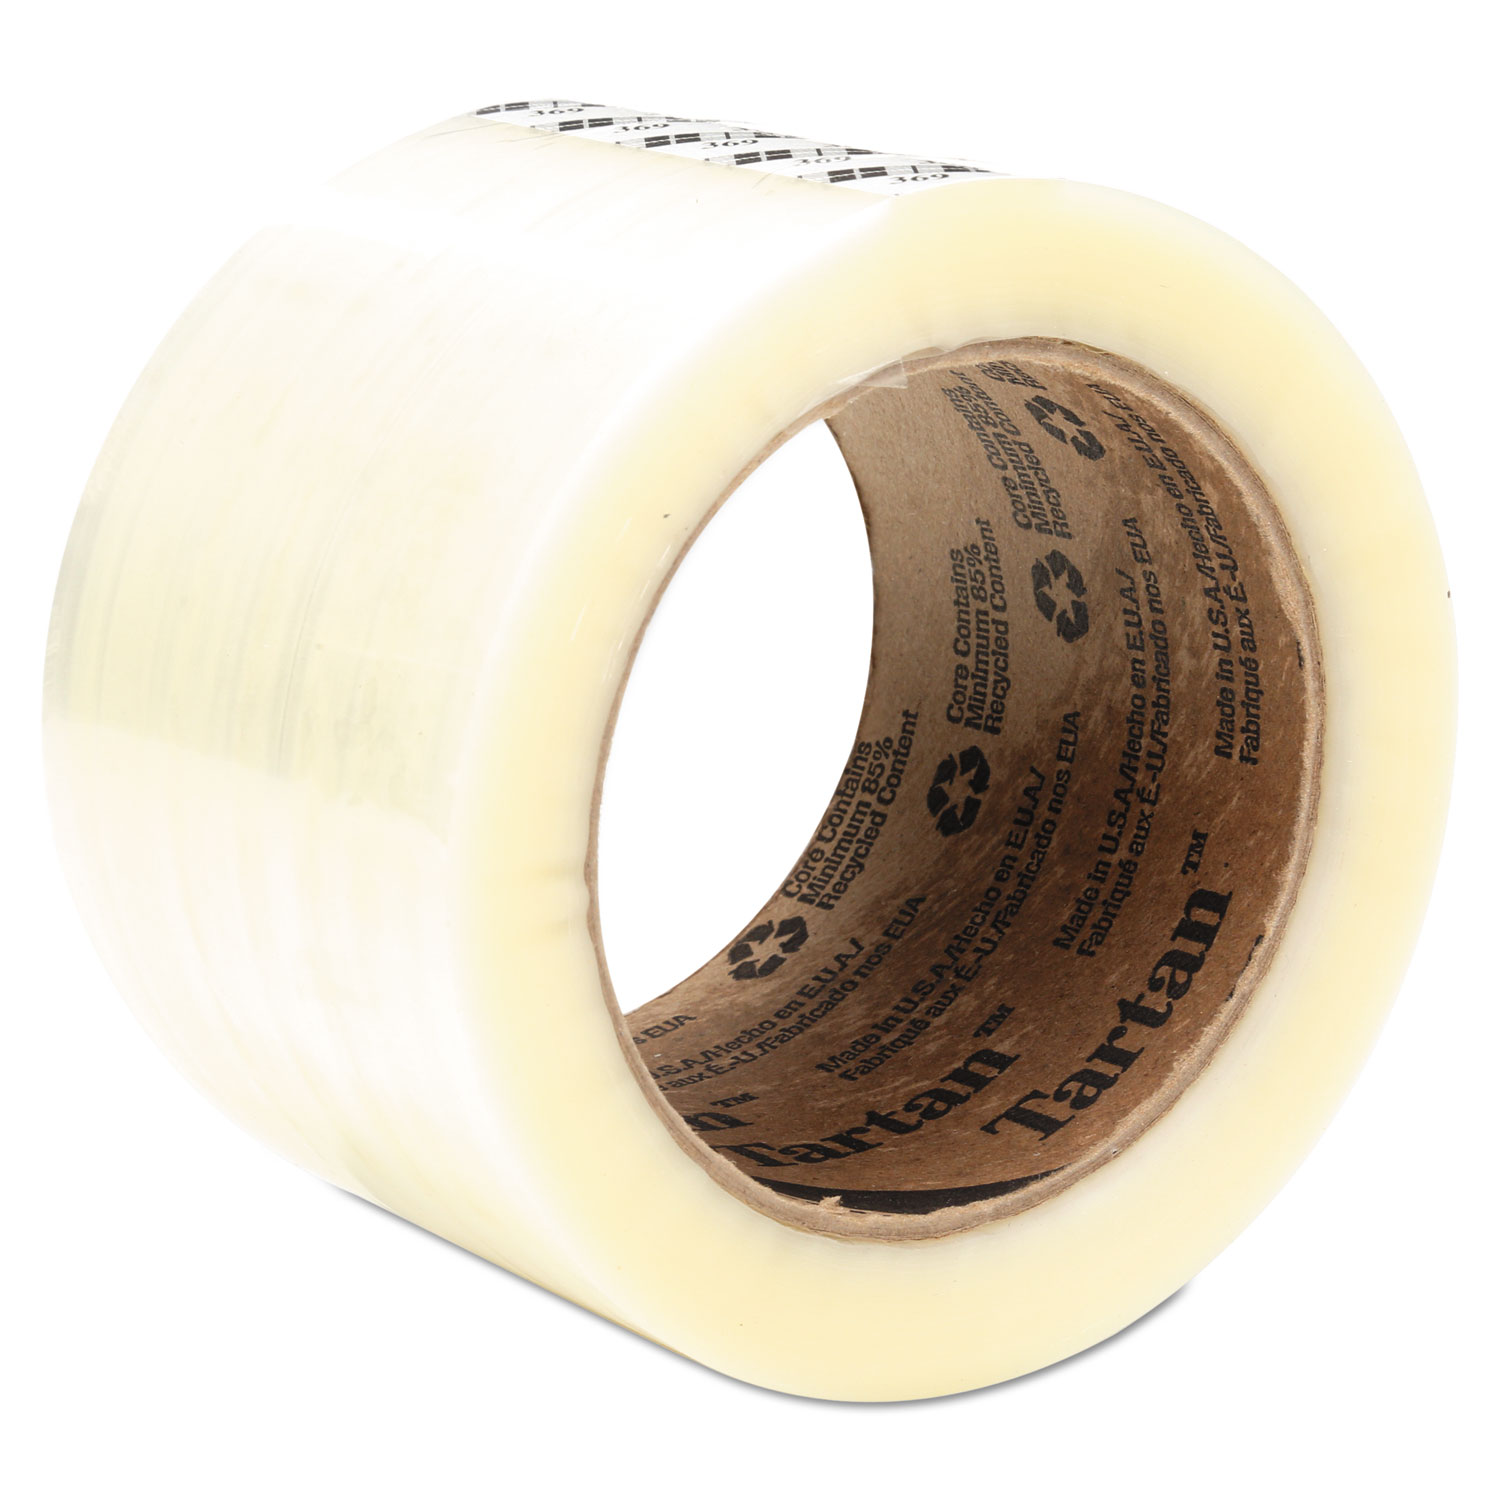 369 Packaging Tape, 72 mm x 100 m, 3 Core, Clear, 24/Carton